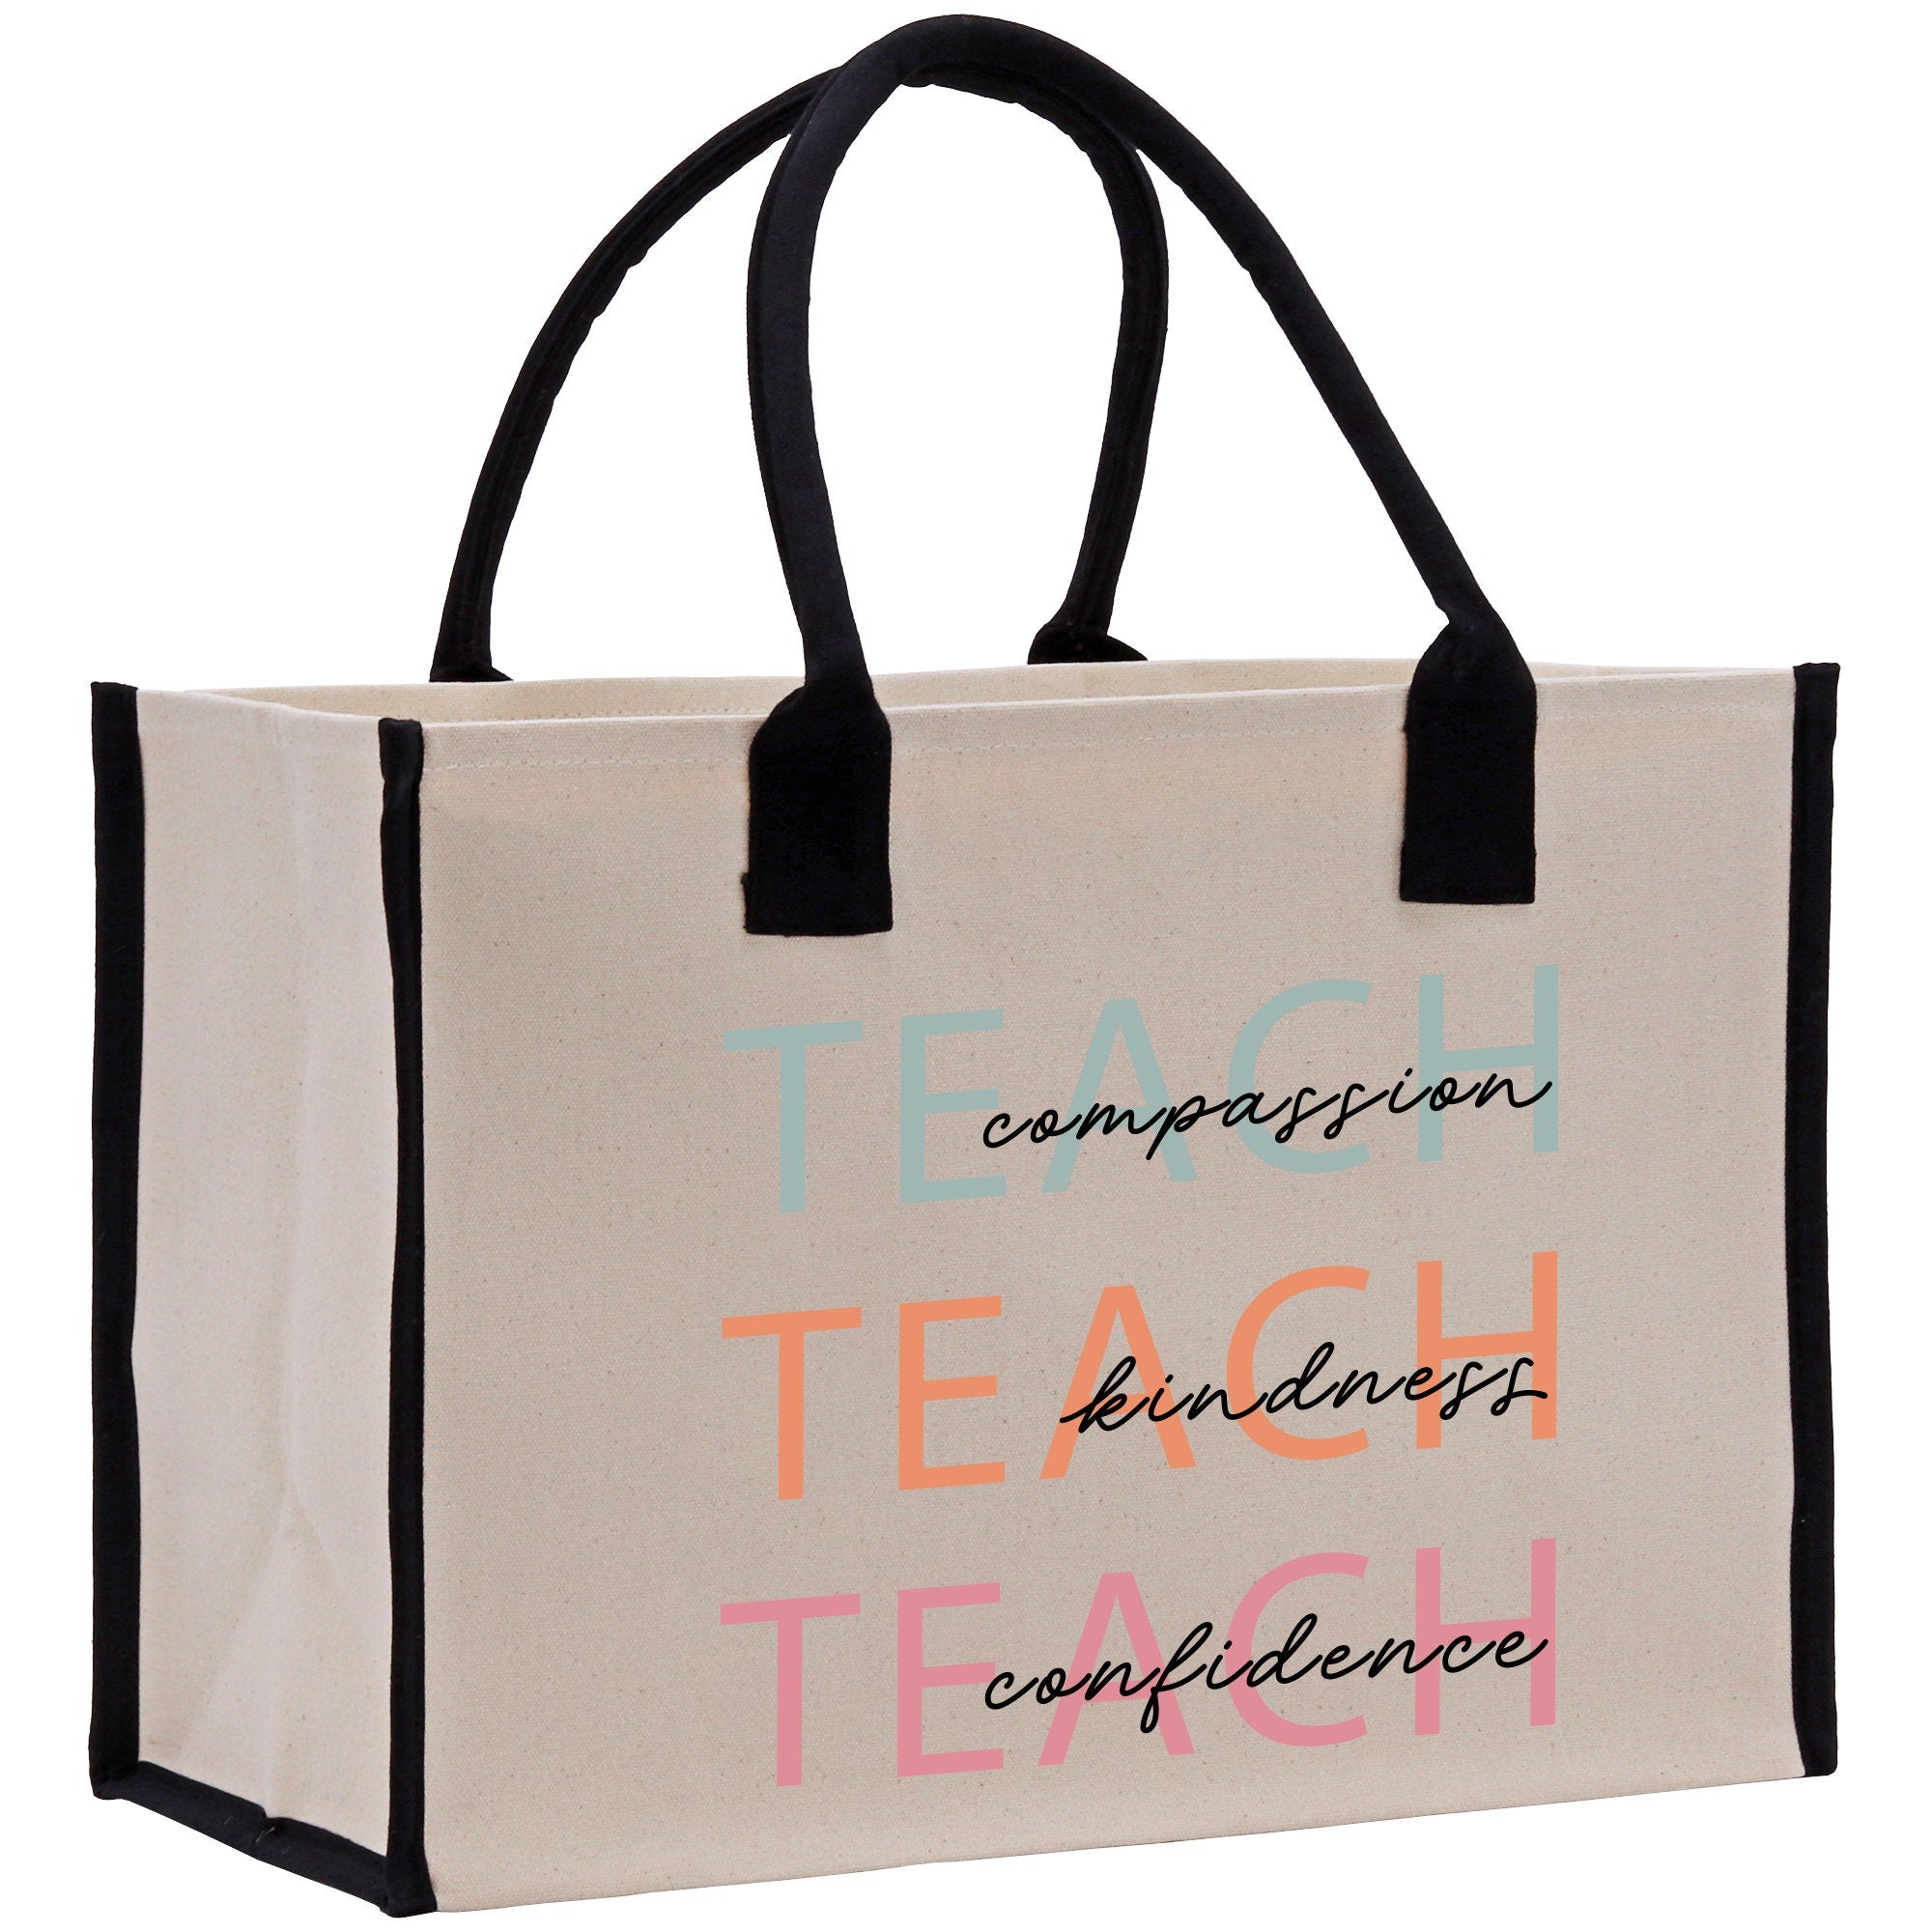 a canvas bag with words written on it